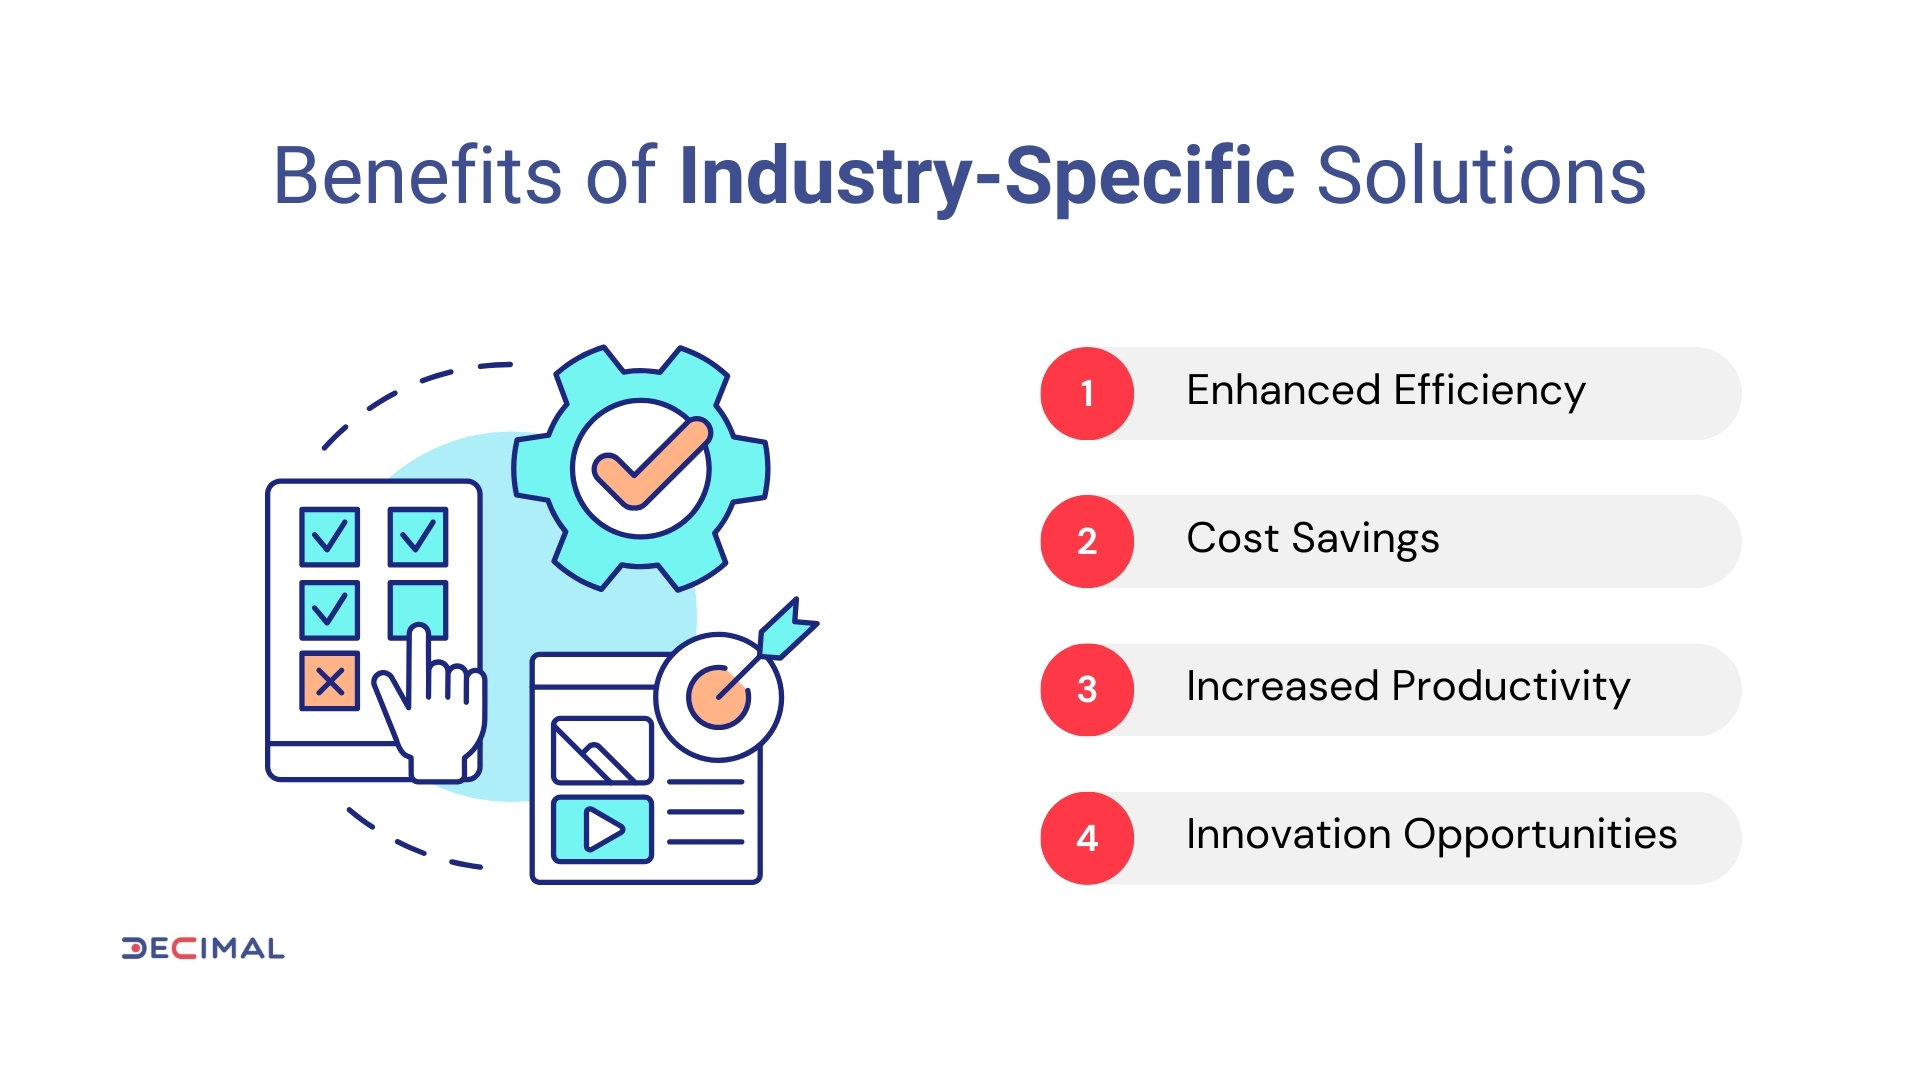 Benefits of Industry-Specific Solutions